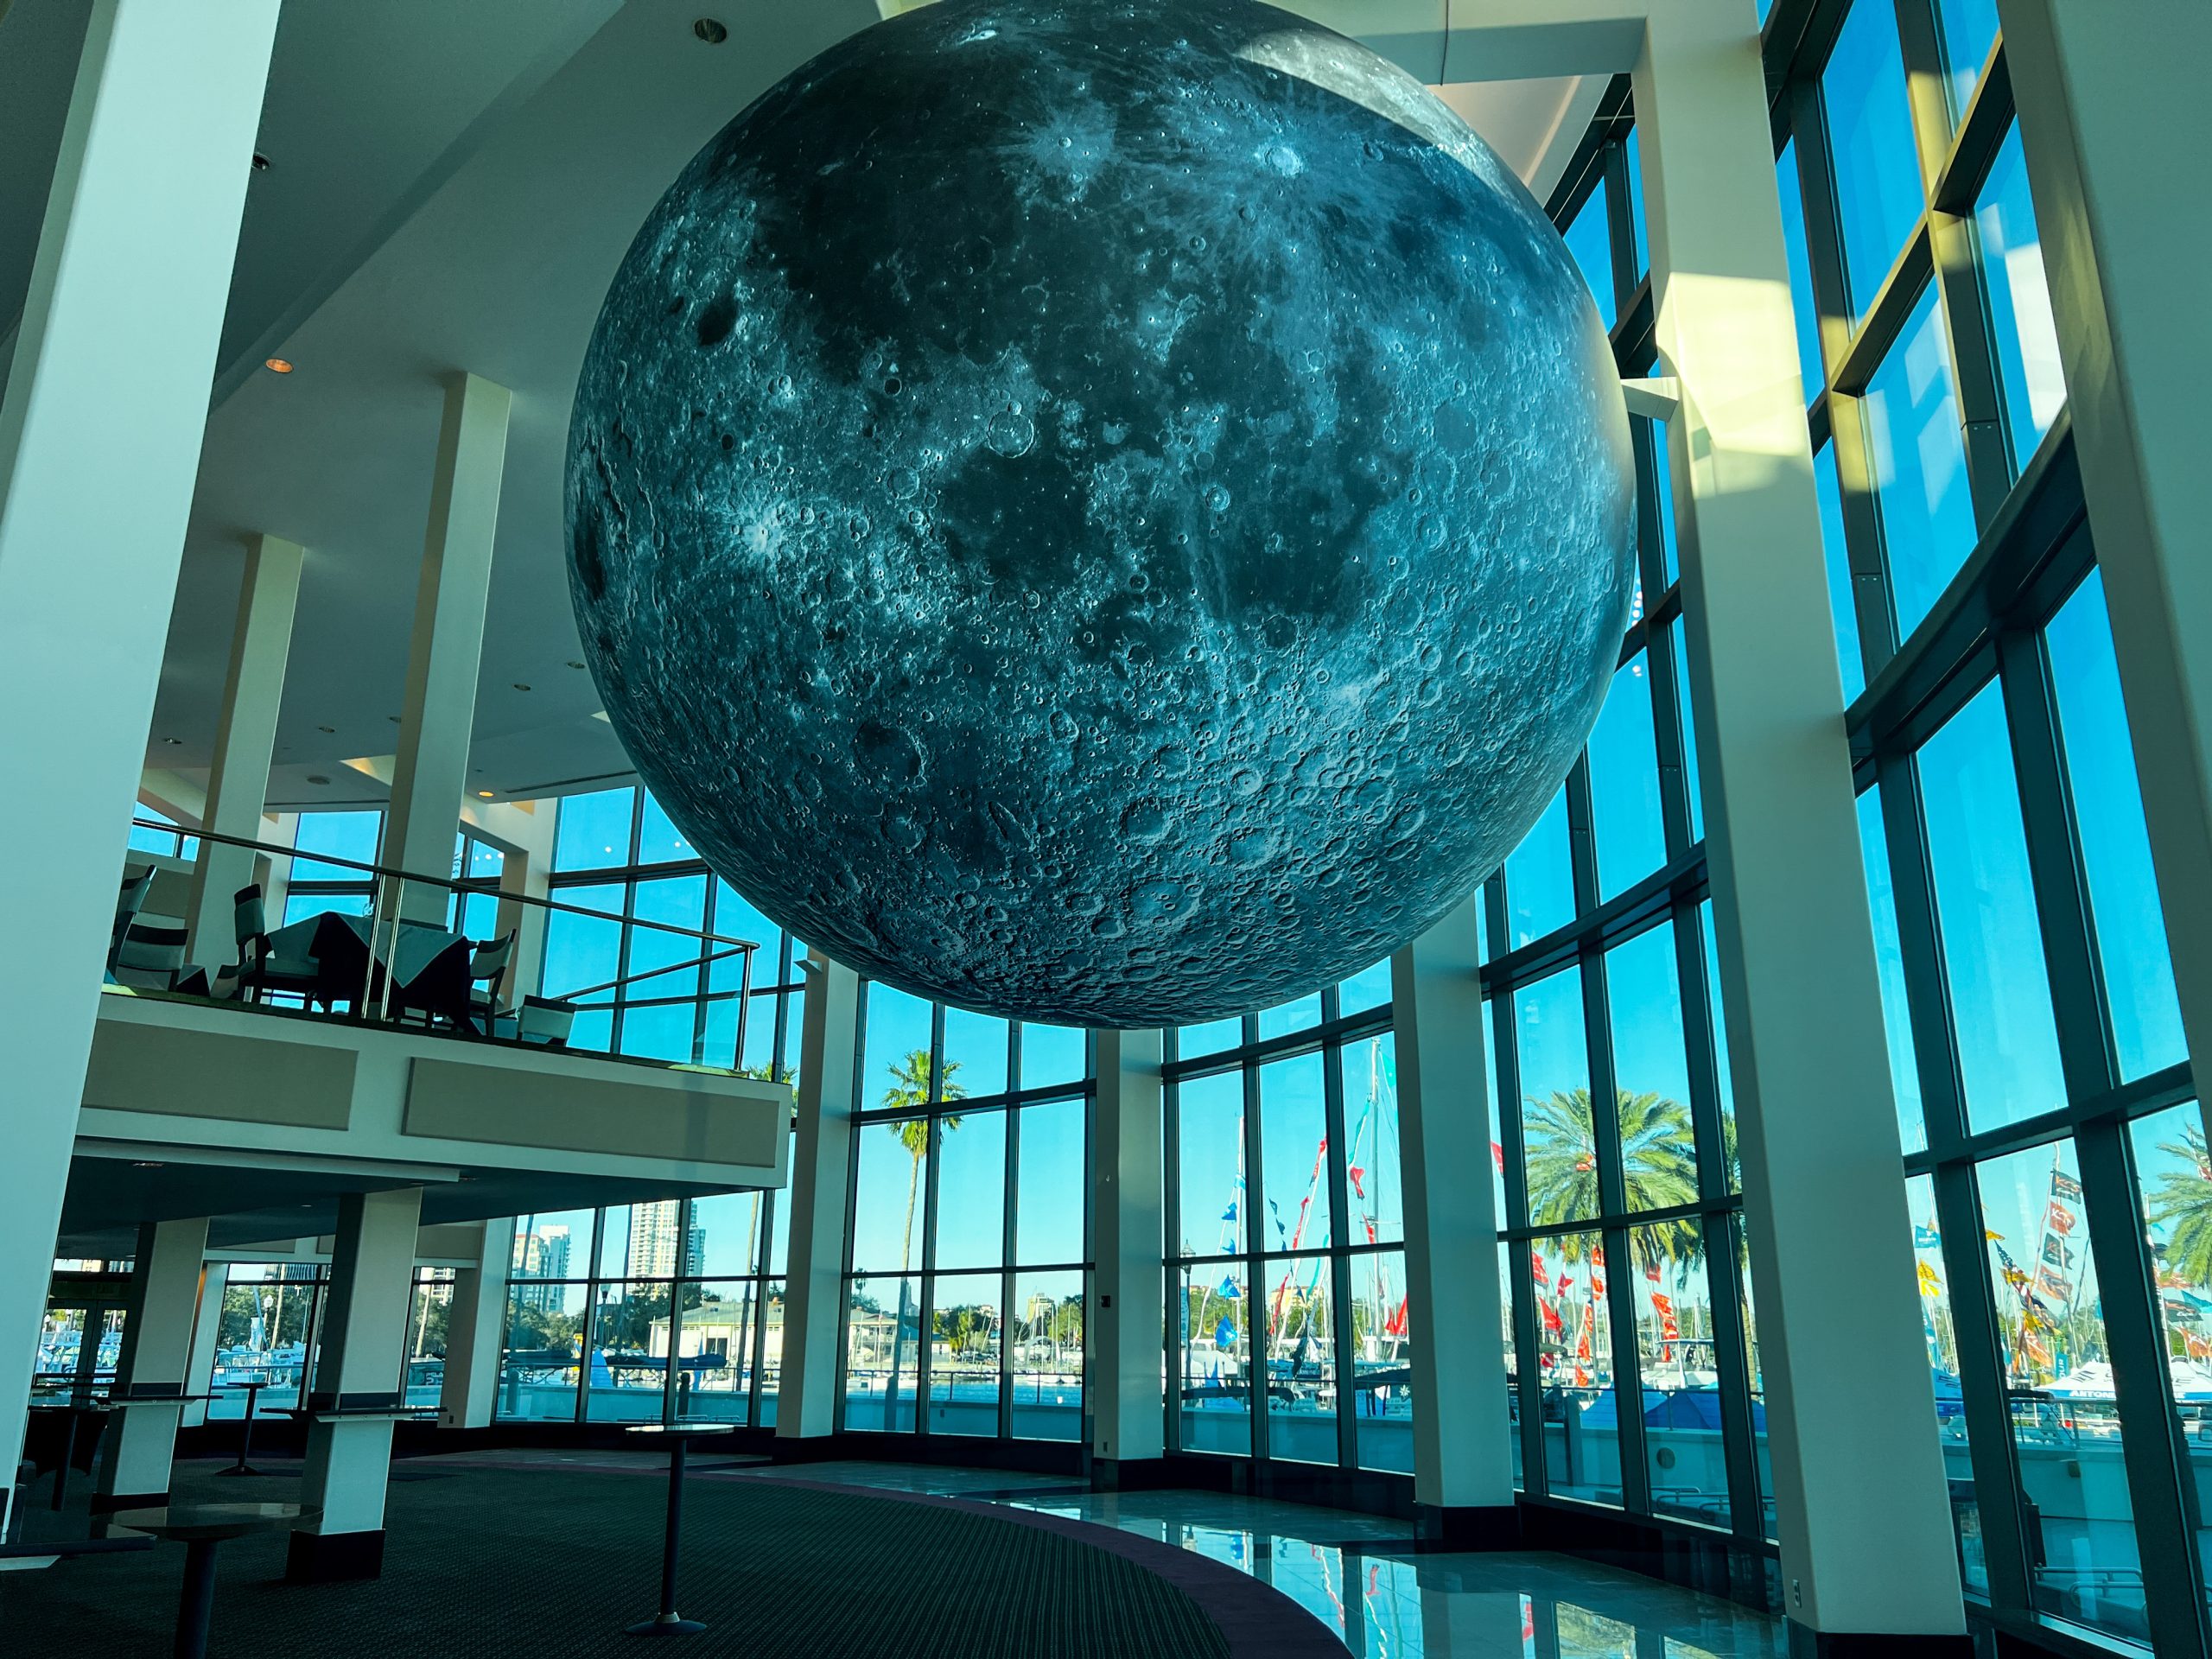 Sonata - View of the moon from the first floor entrance during the day